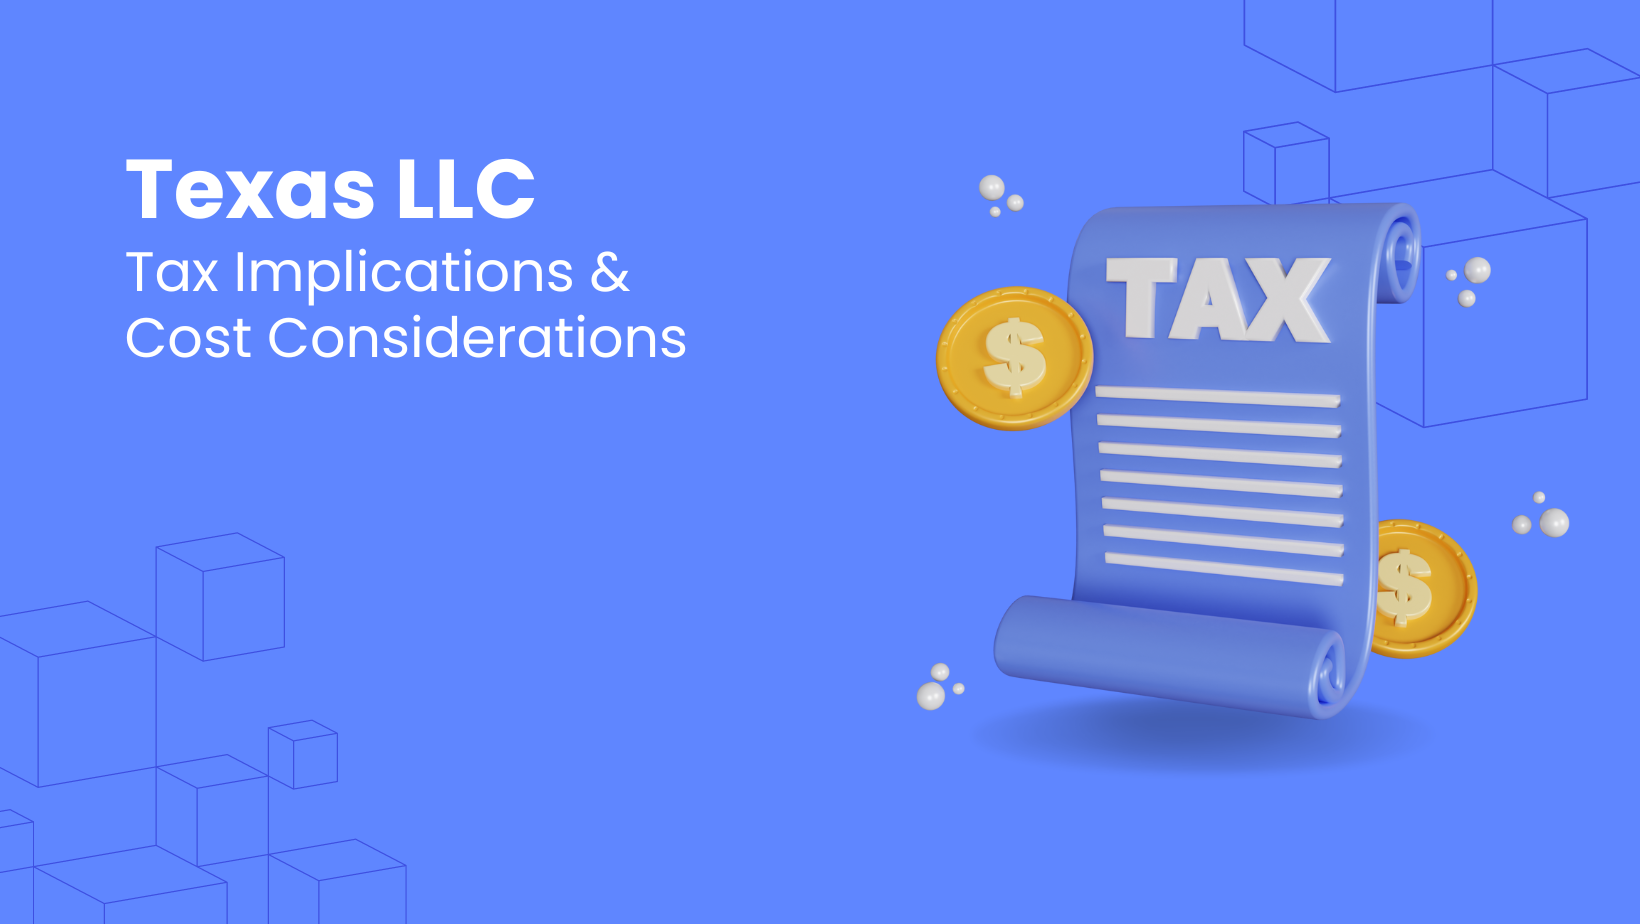 Texas LLC Tax Implications and Cost Considerations